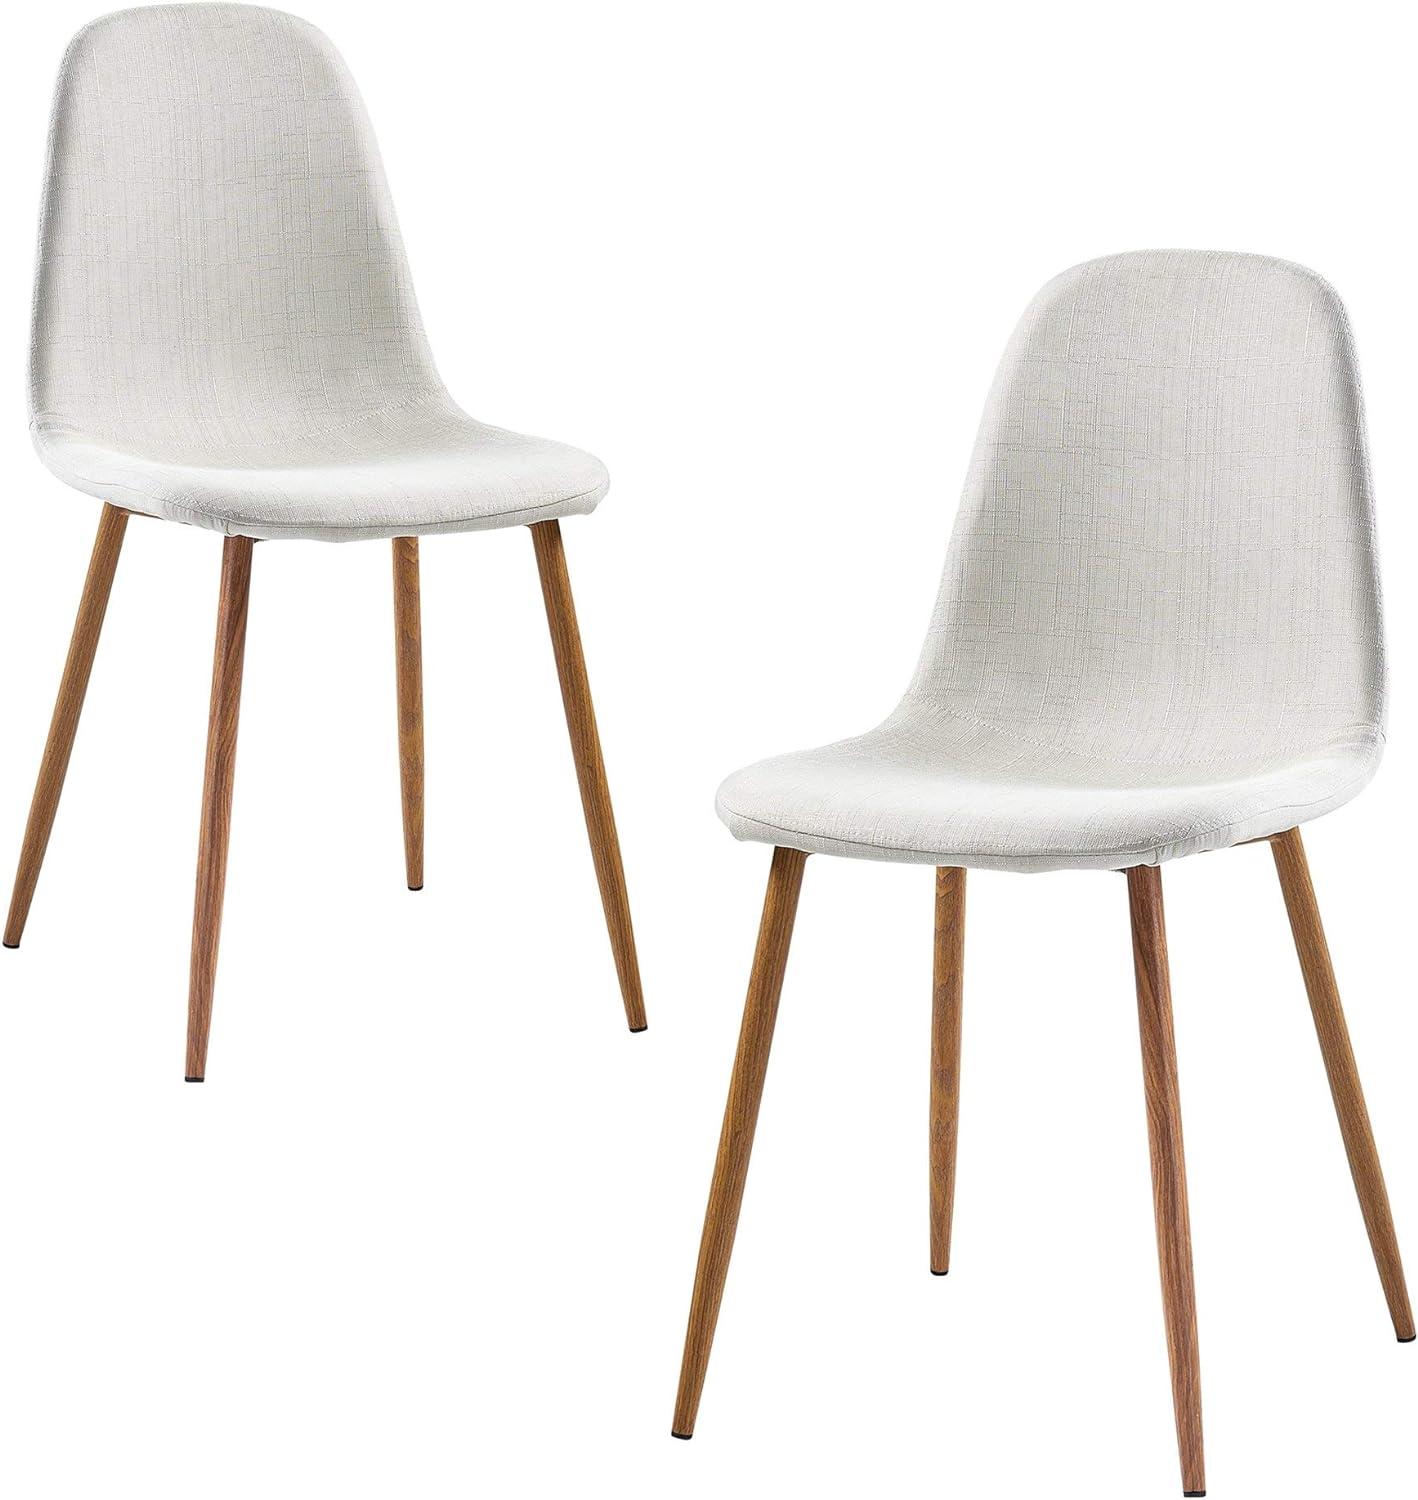 Set of 2 High-Back White Faux Leather & Metal Side Chairs